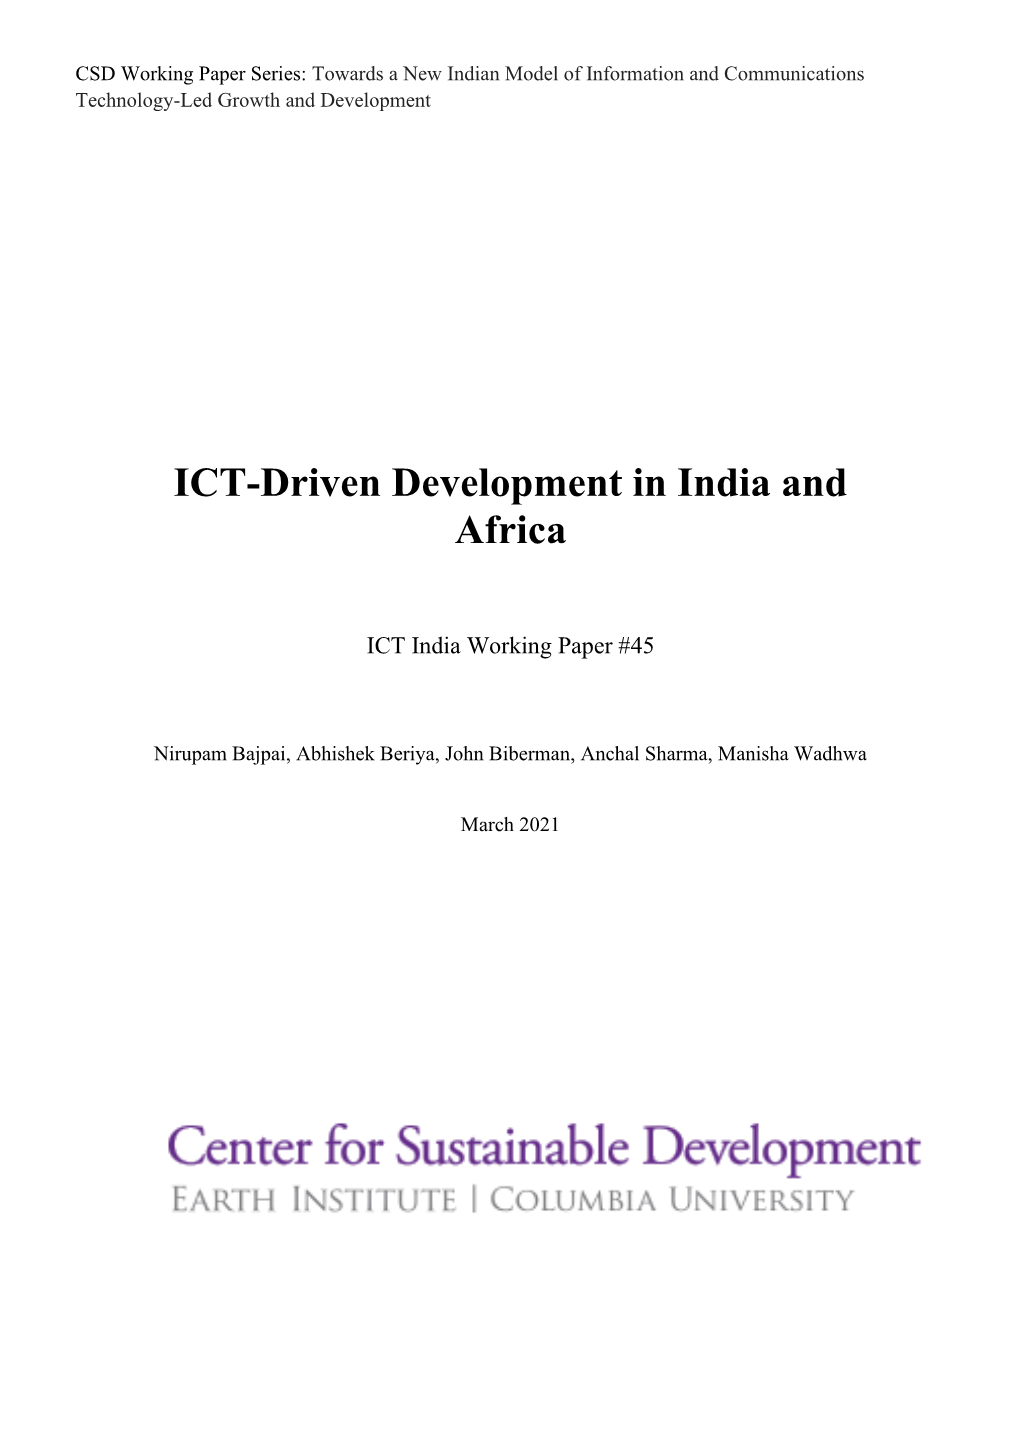 ICT-Driven Development in India and Africa